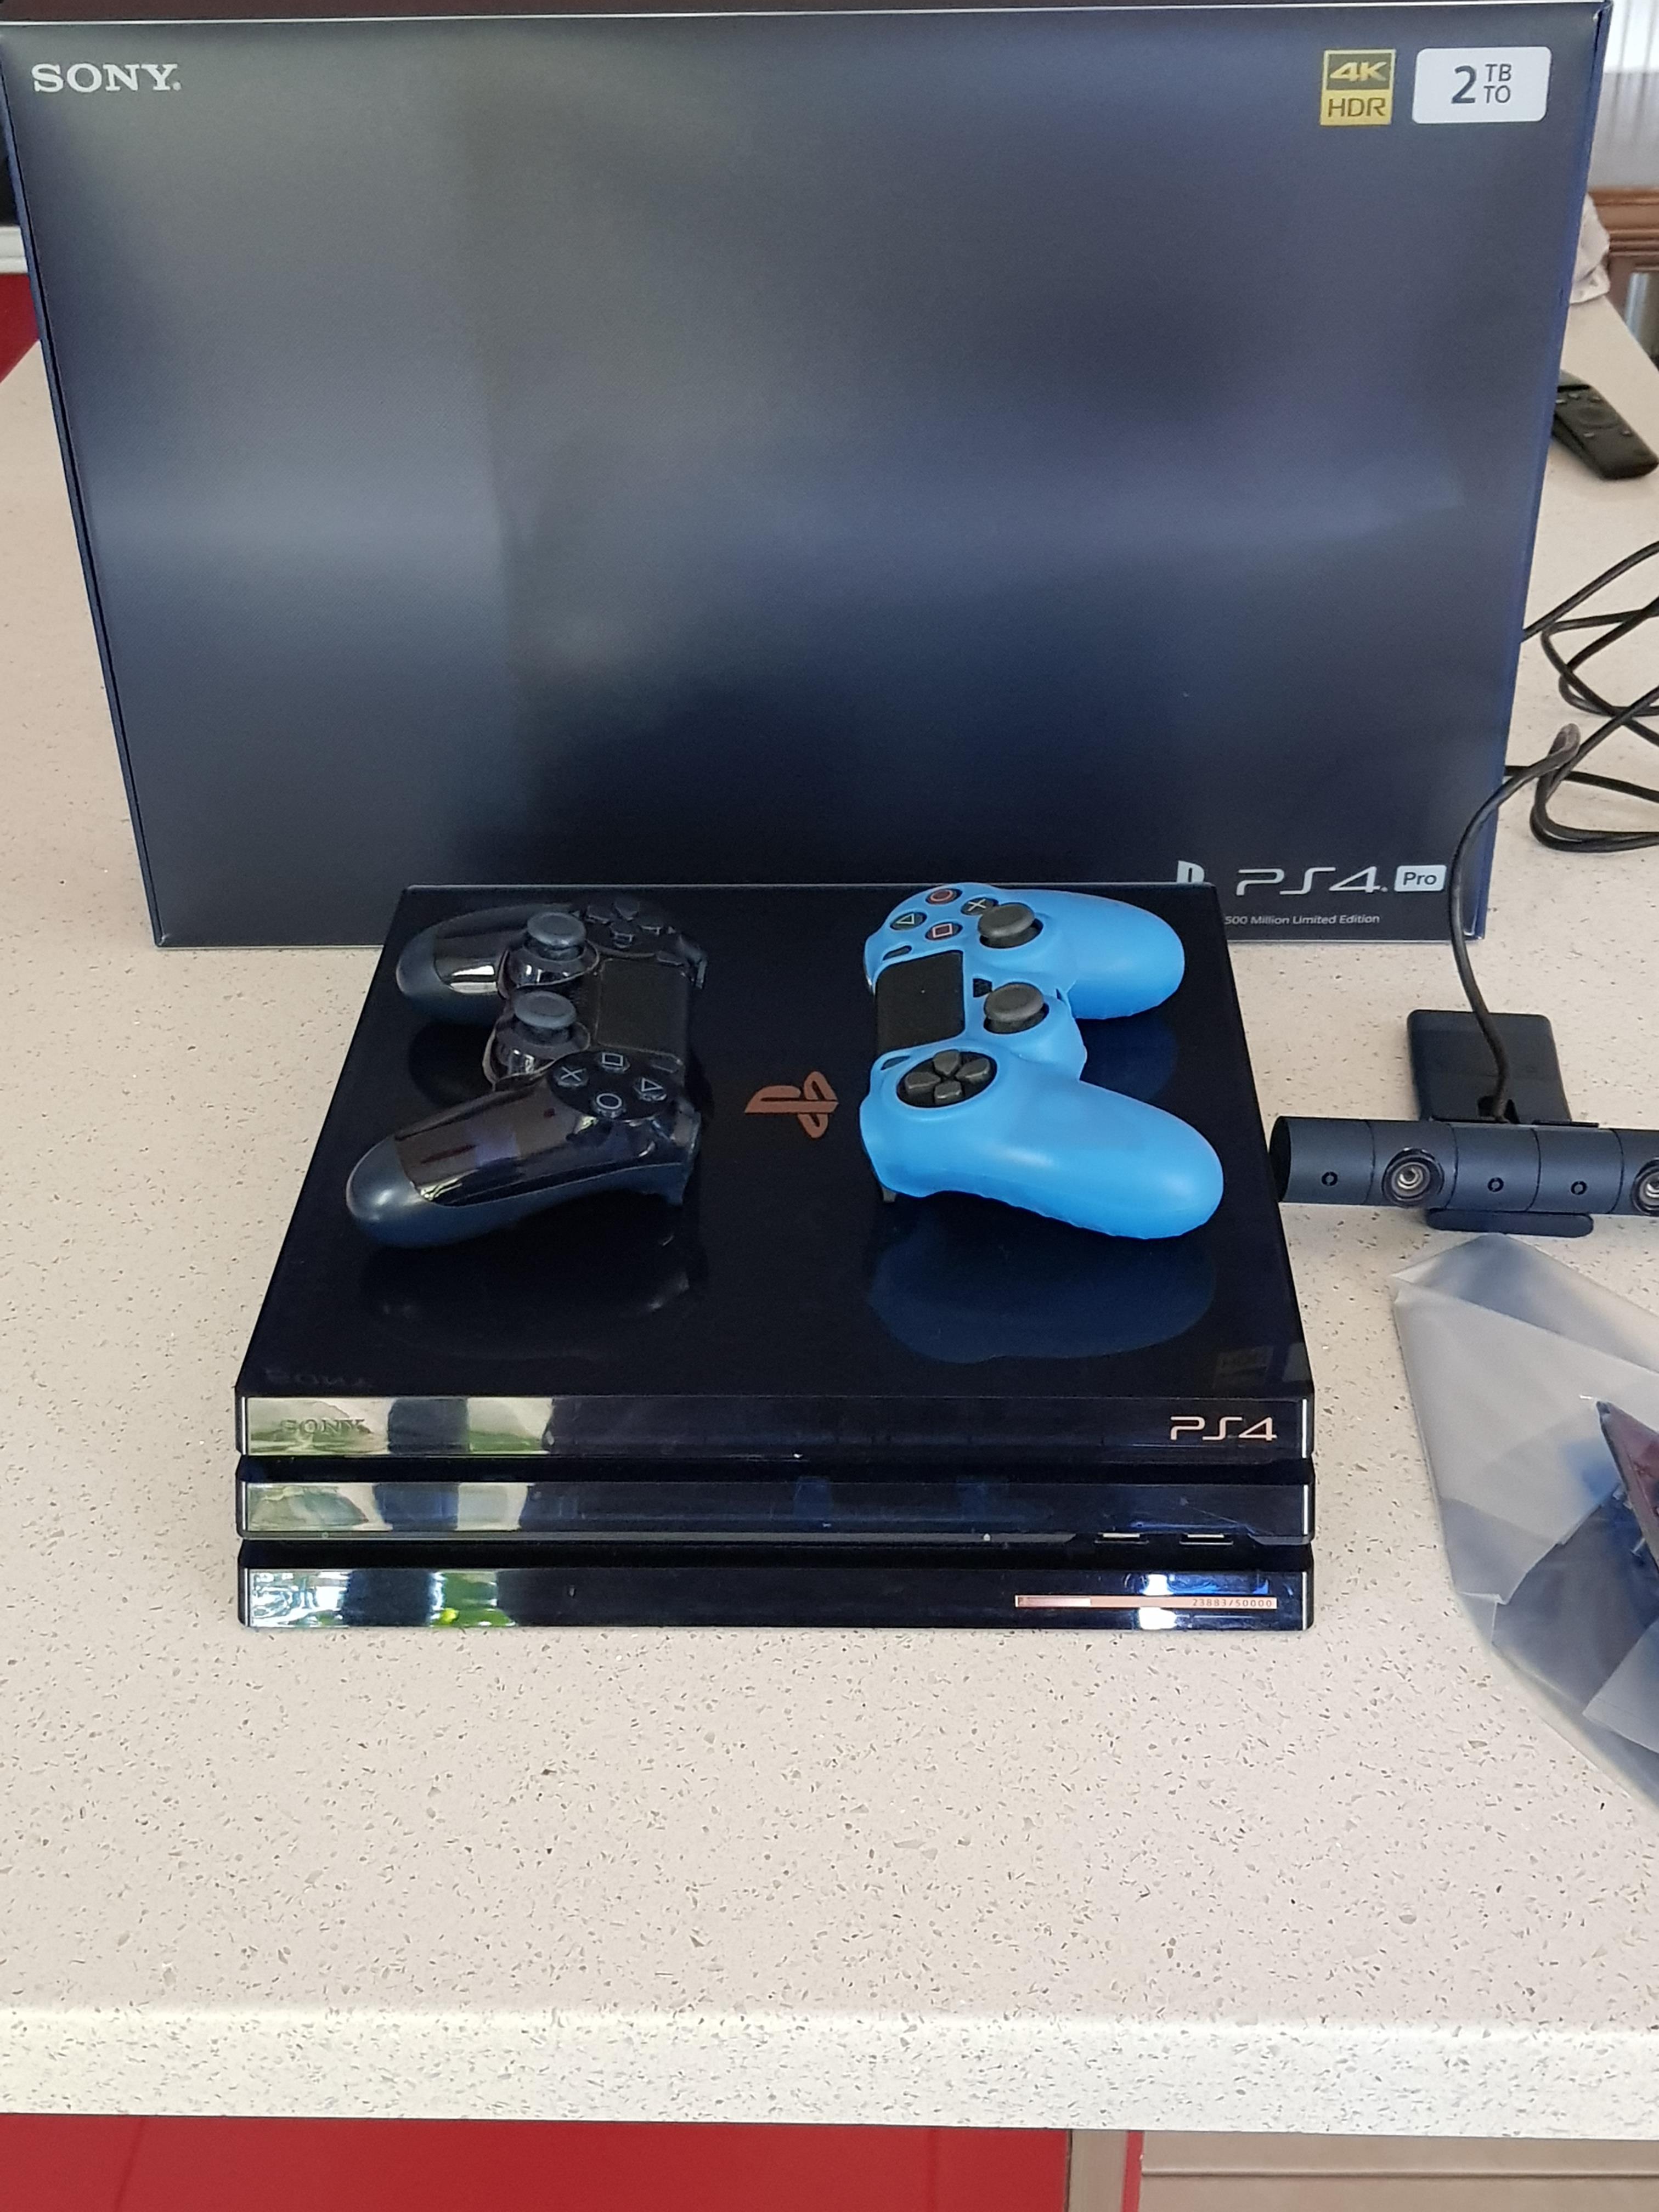 Ps4 pro 2tb 500 million limited edition